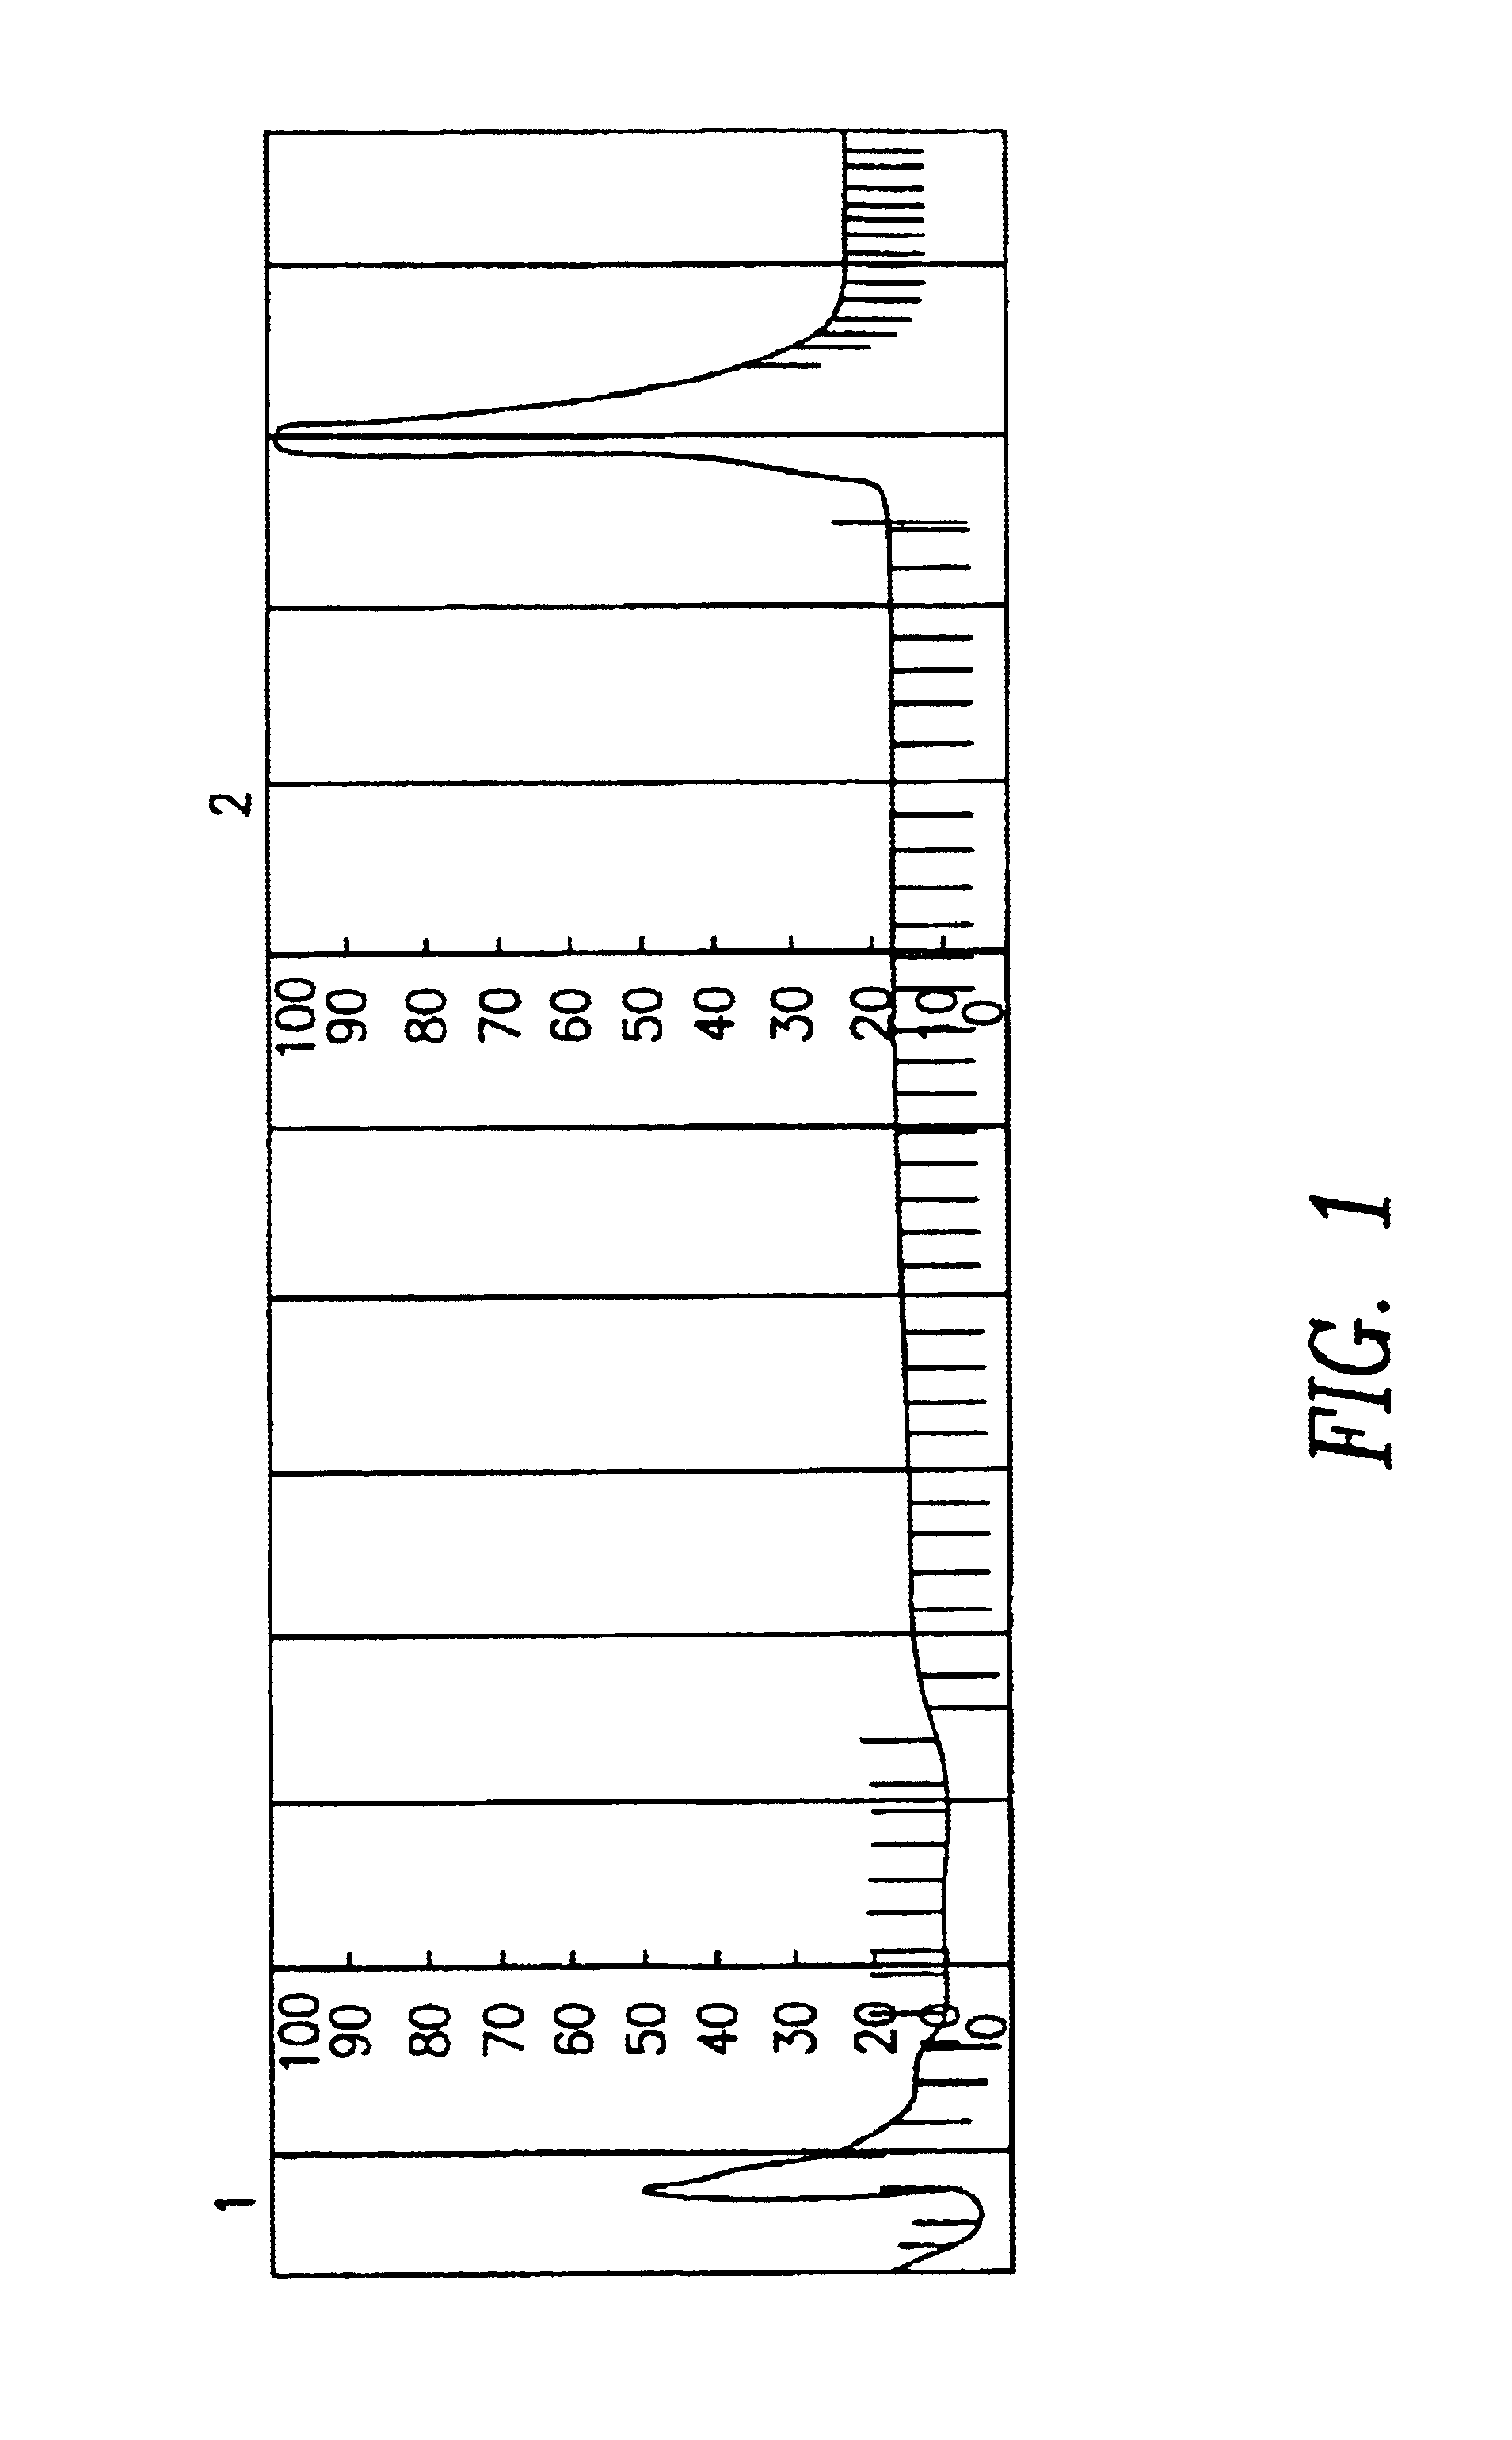 Patient-specific immunoadsorbers for the extracorporeal apheresis and methods for their preparation